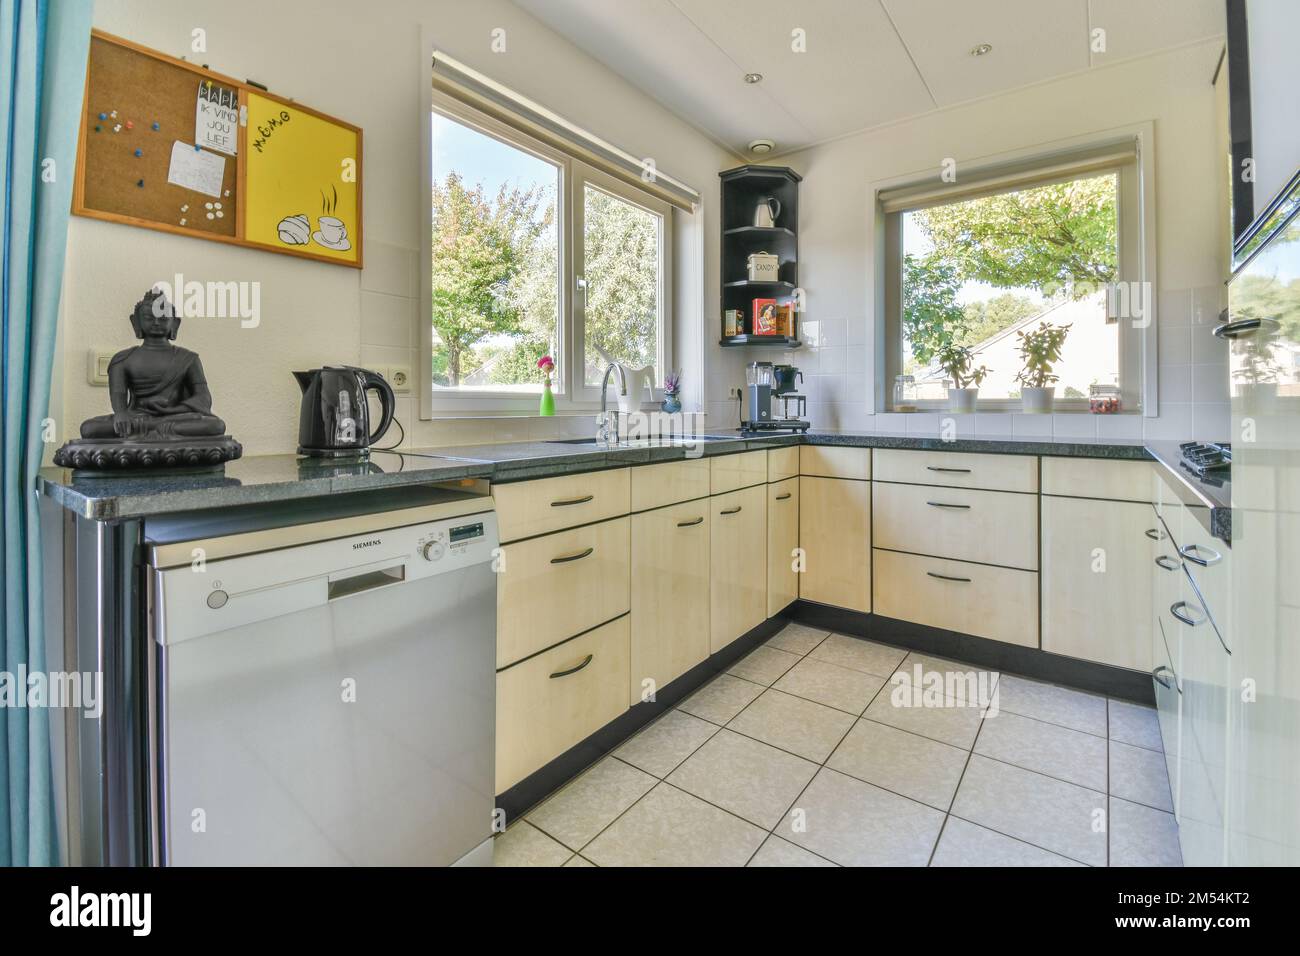 a kitchen area with white cabinets and black counter tops on the counters in this photo is taken from the inside Stock Photo